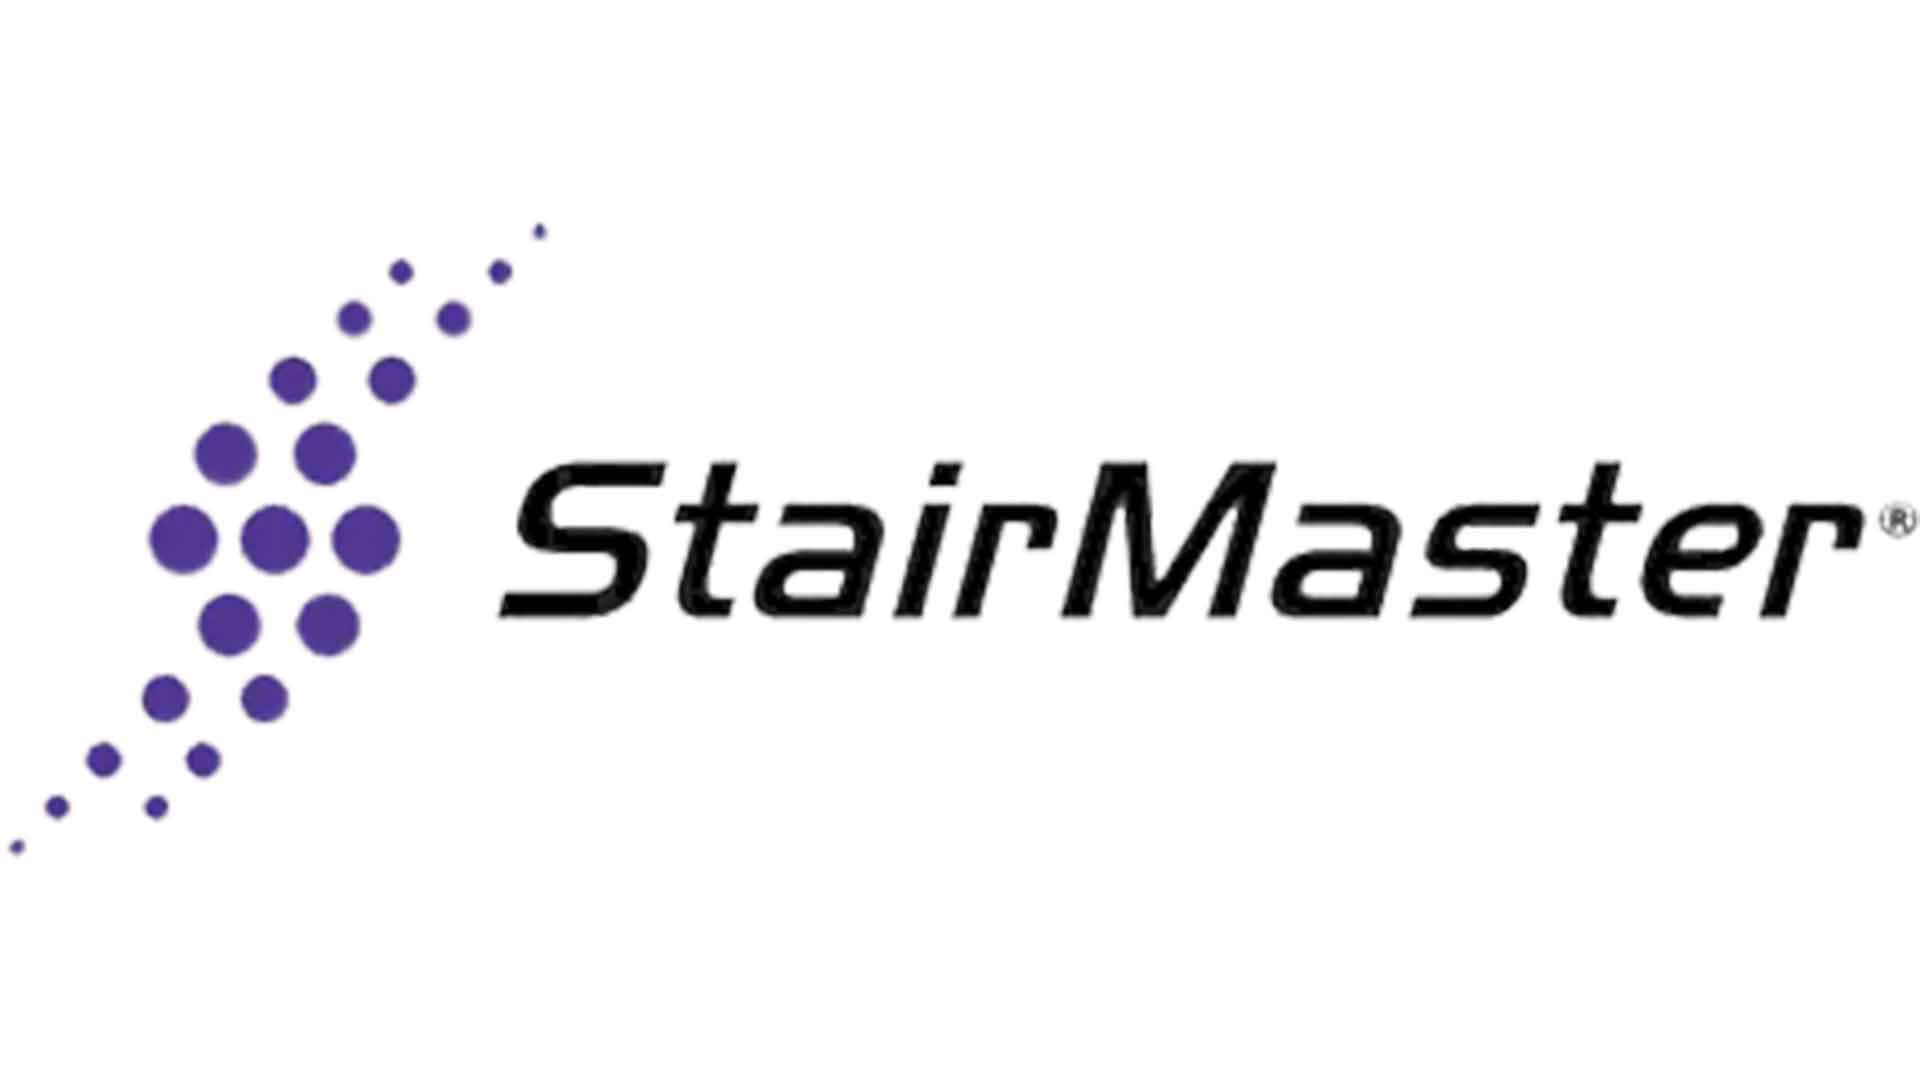 A logo of stairmaster